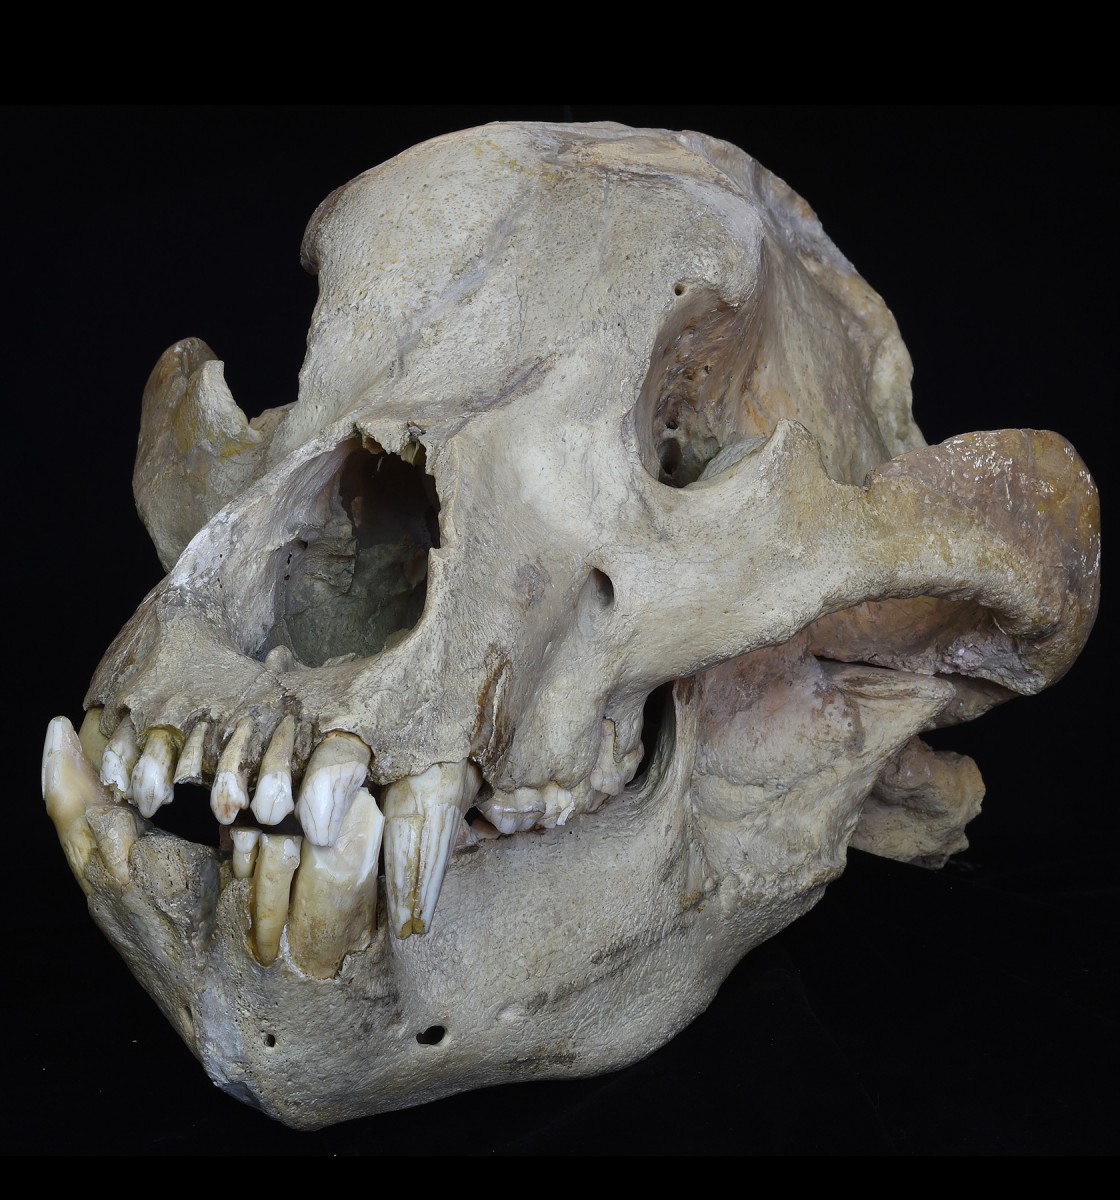 Skull of an extinct cave bear, Ursus spelaeus, 
from the Pleistocene [locality unknown]. 
© Collection of Senckenberg Research Institute 
and Natural History Museum, Frankfurt, Germany 
(collection number SMF M 8047), 
photo: Sven Tränkner